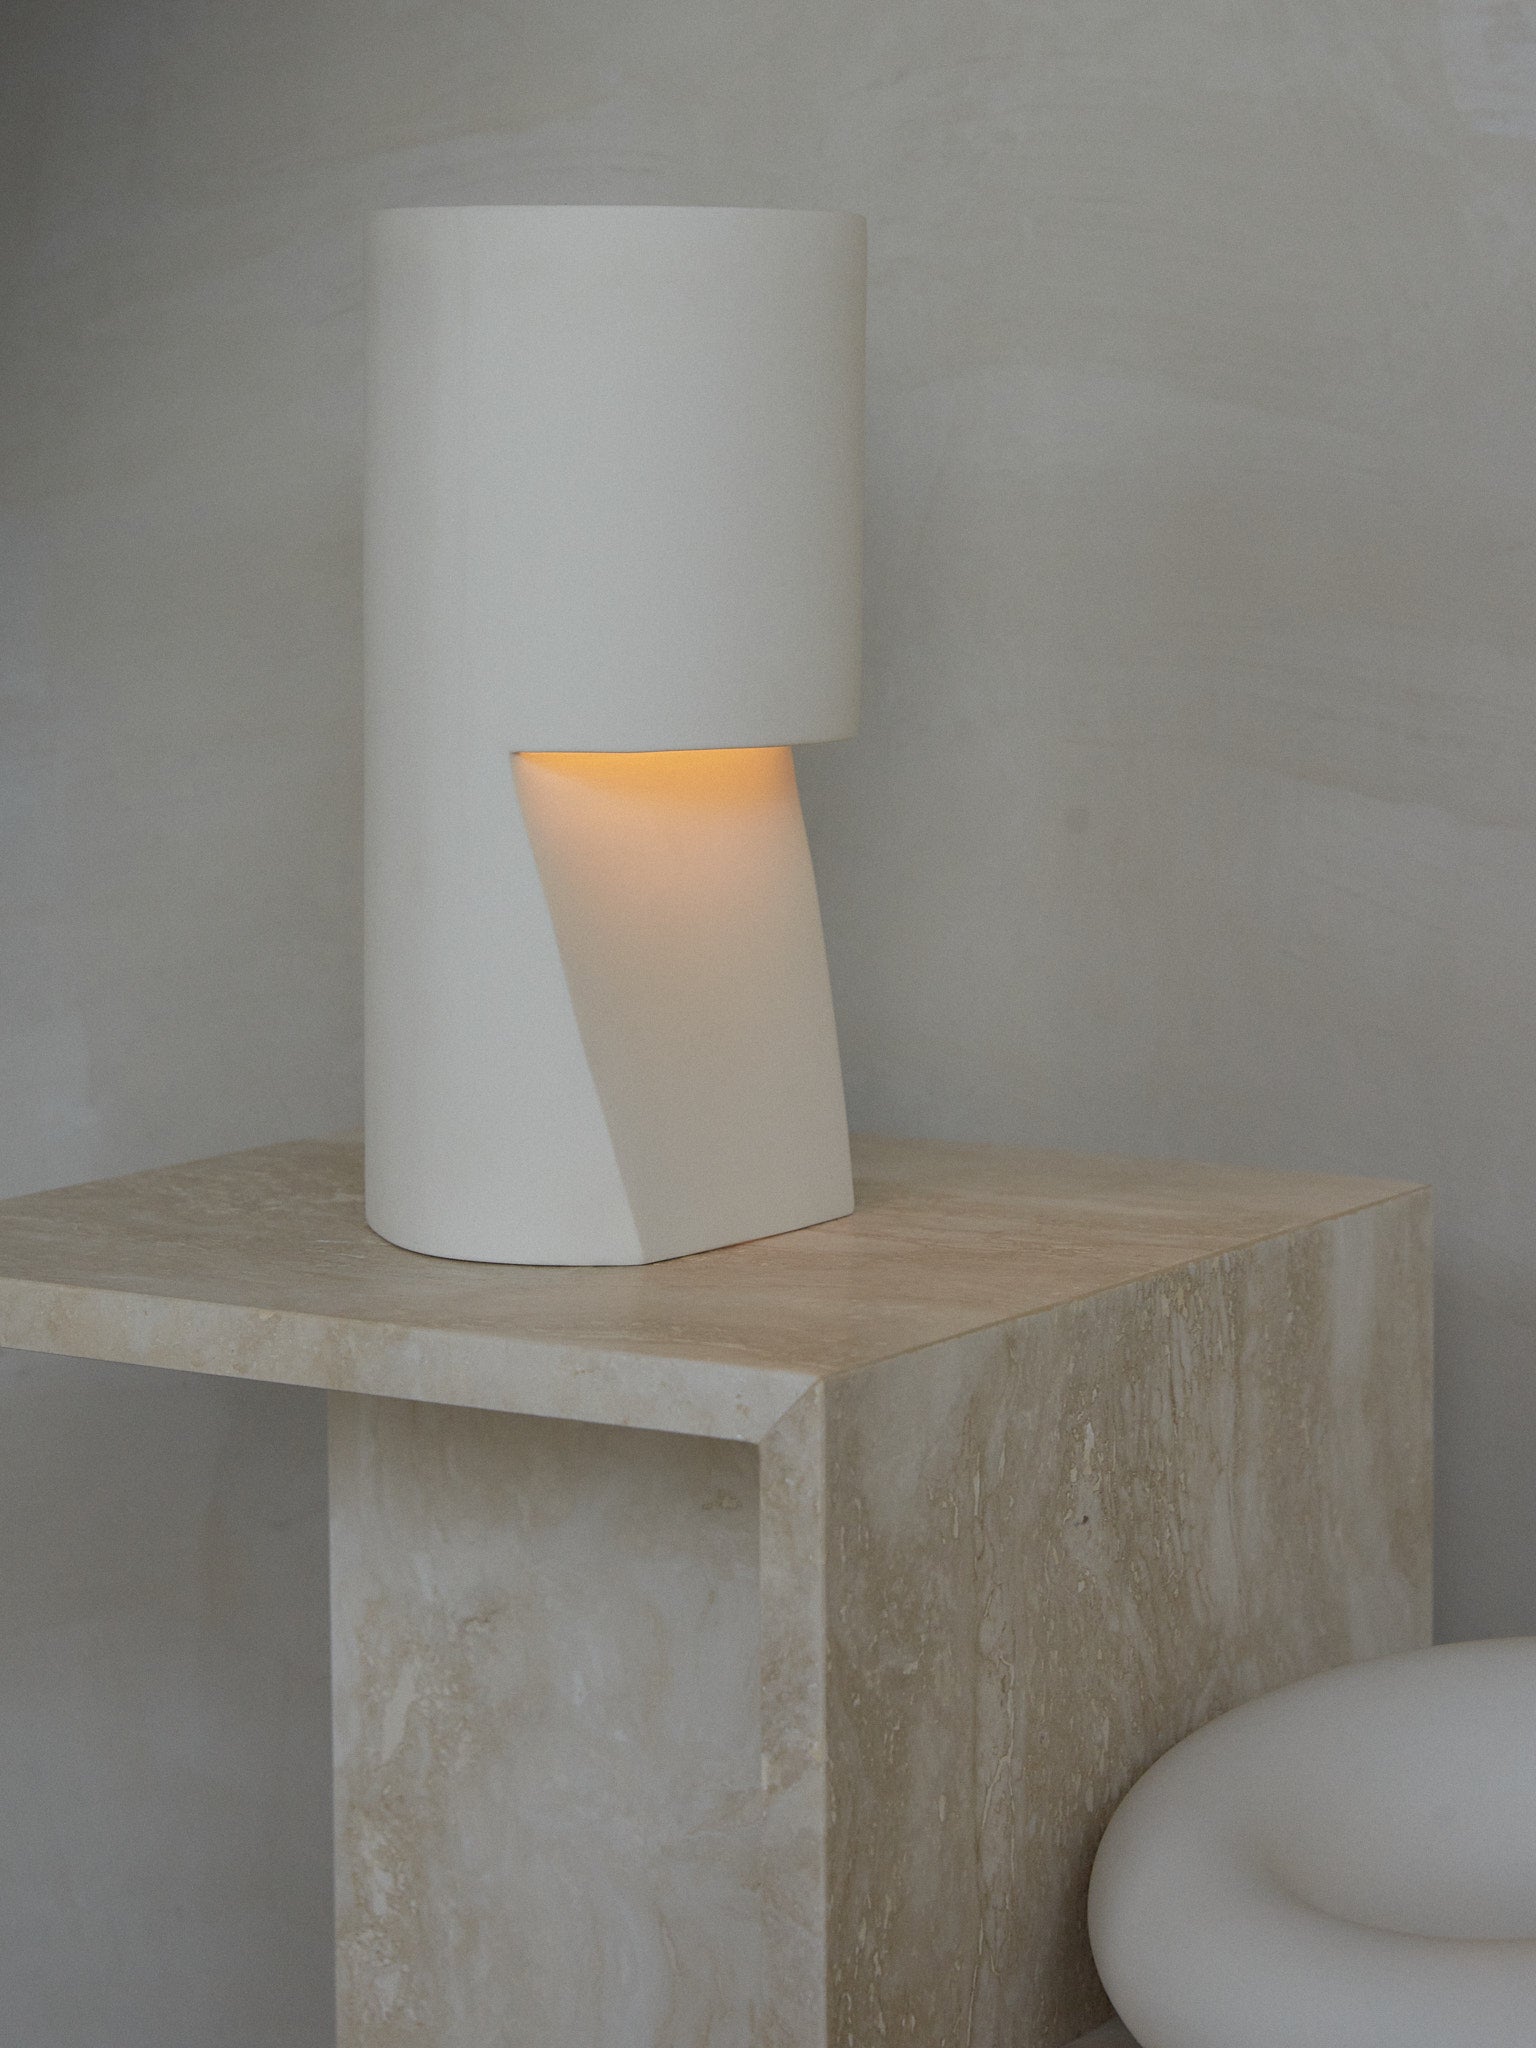 Pillar Light. A cylindrical, hand sanded porcelain pillar table lamp in natural white.  Light shines subtly from a hollow outcropping in the porcelain body. 